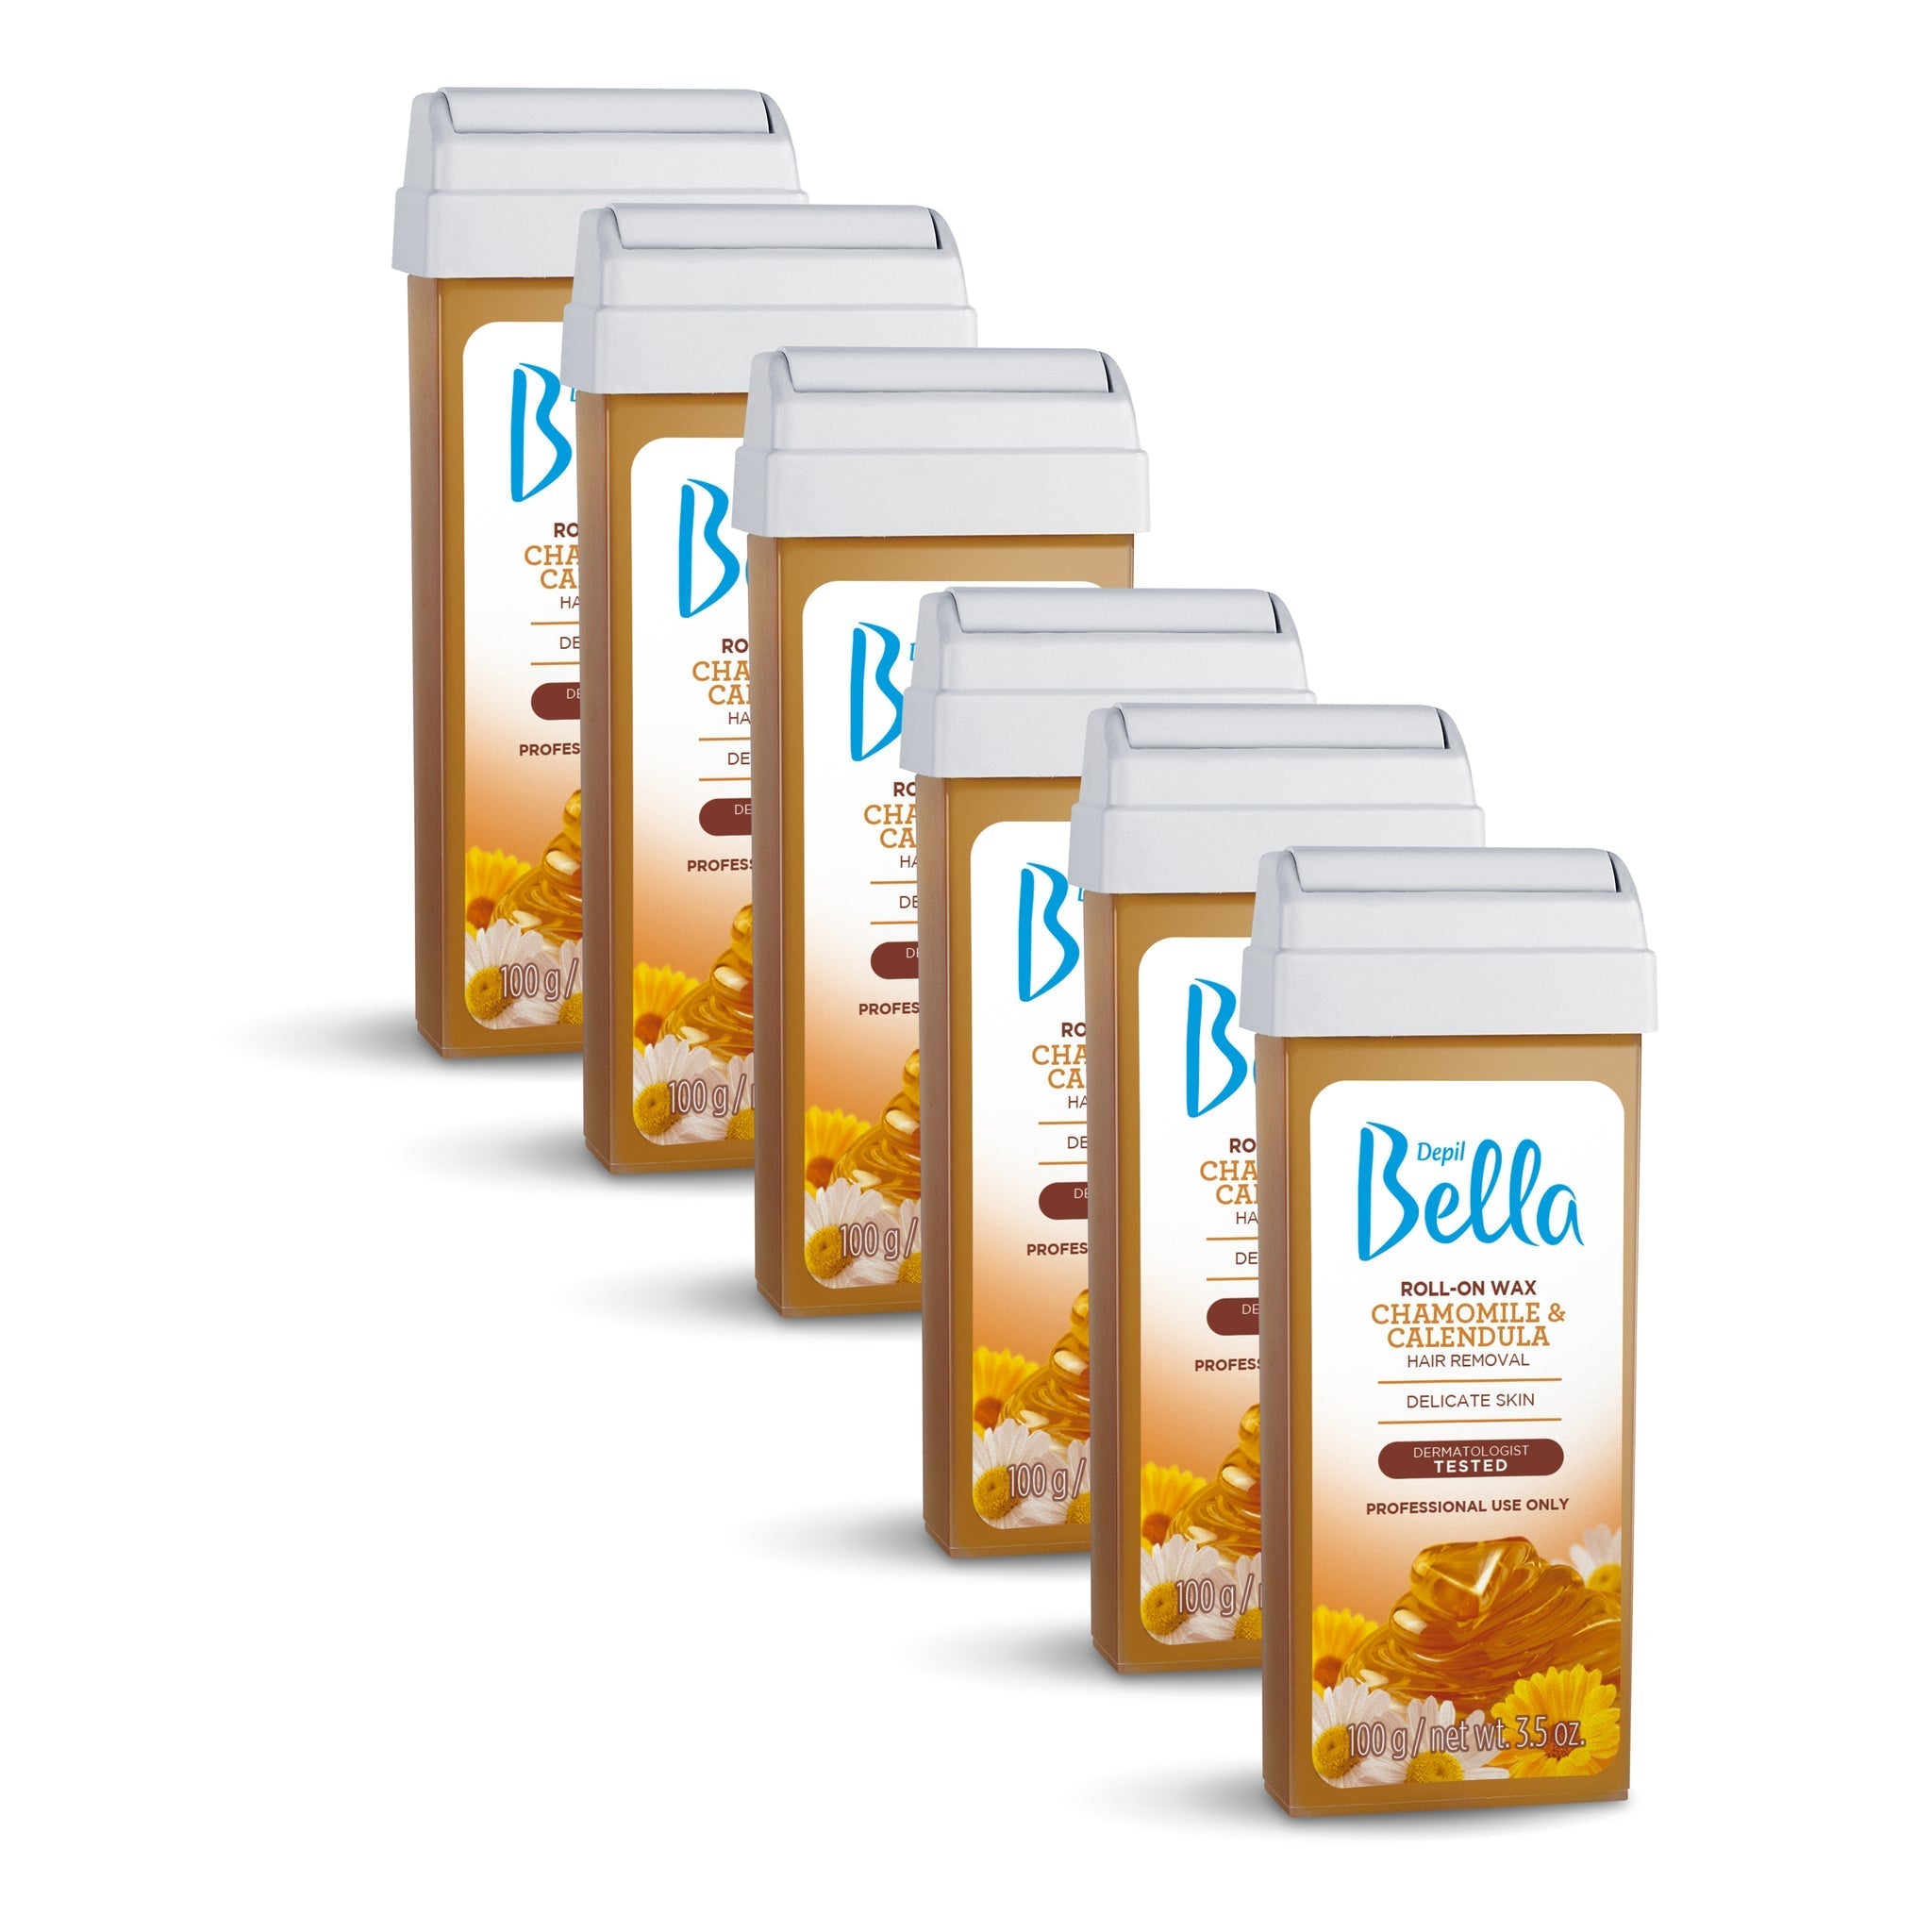 Depil Bella Hair Removal Wax Depil Bella Roll on Chamomile and Calendula Wax Hair Removal Cartridges 3.52Oz (6 Units )